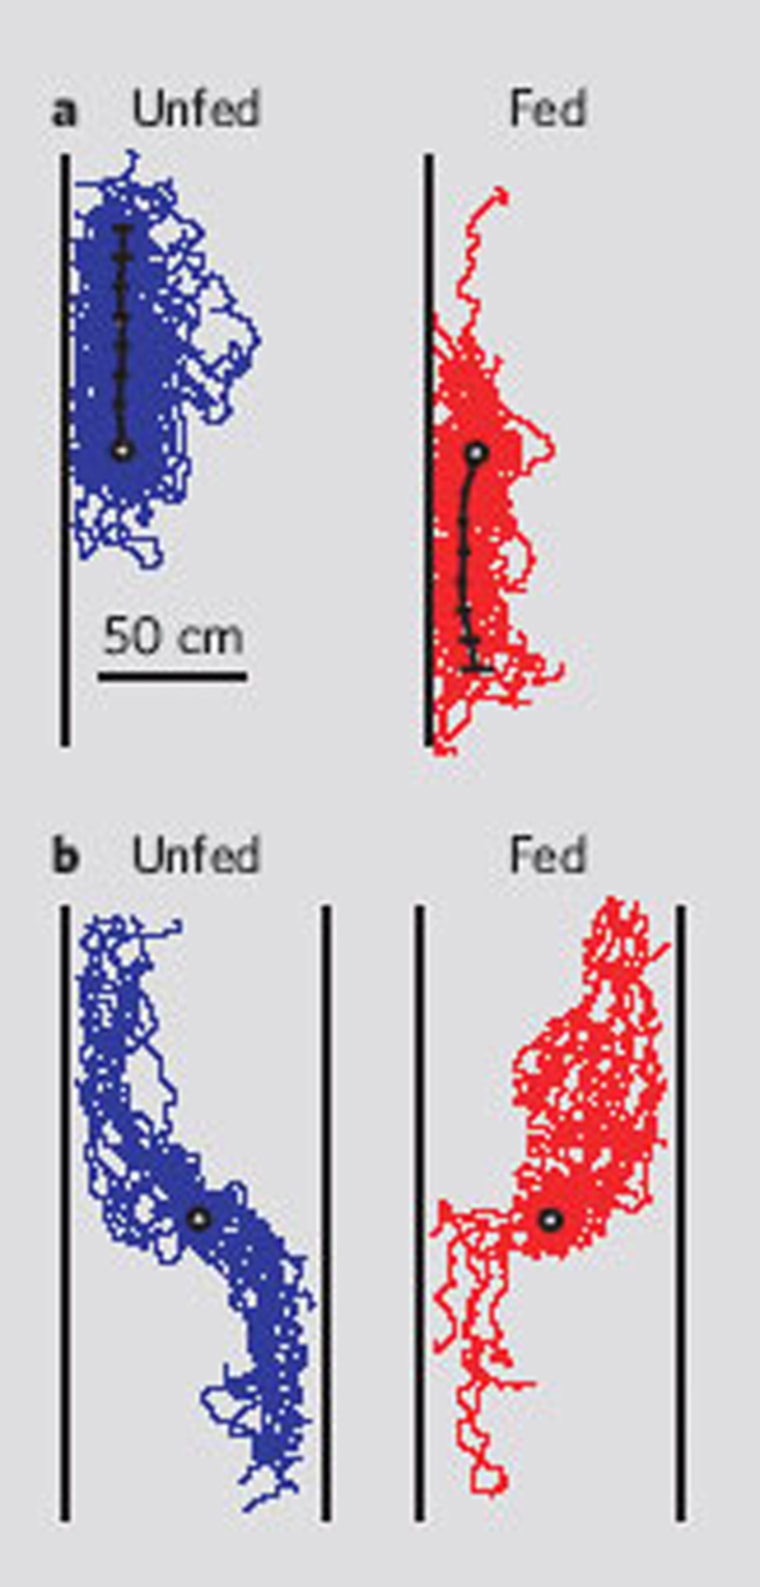 a) Experiment with a single black wall. b) Experiment with two black walls. The path taken by unfed ants are shown in blue while that of fed ants are shown in red.